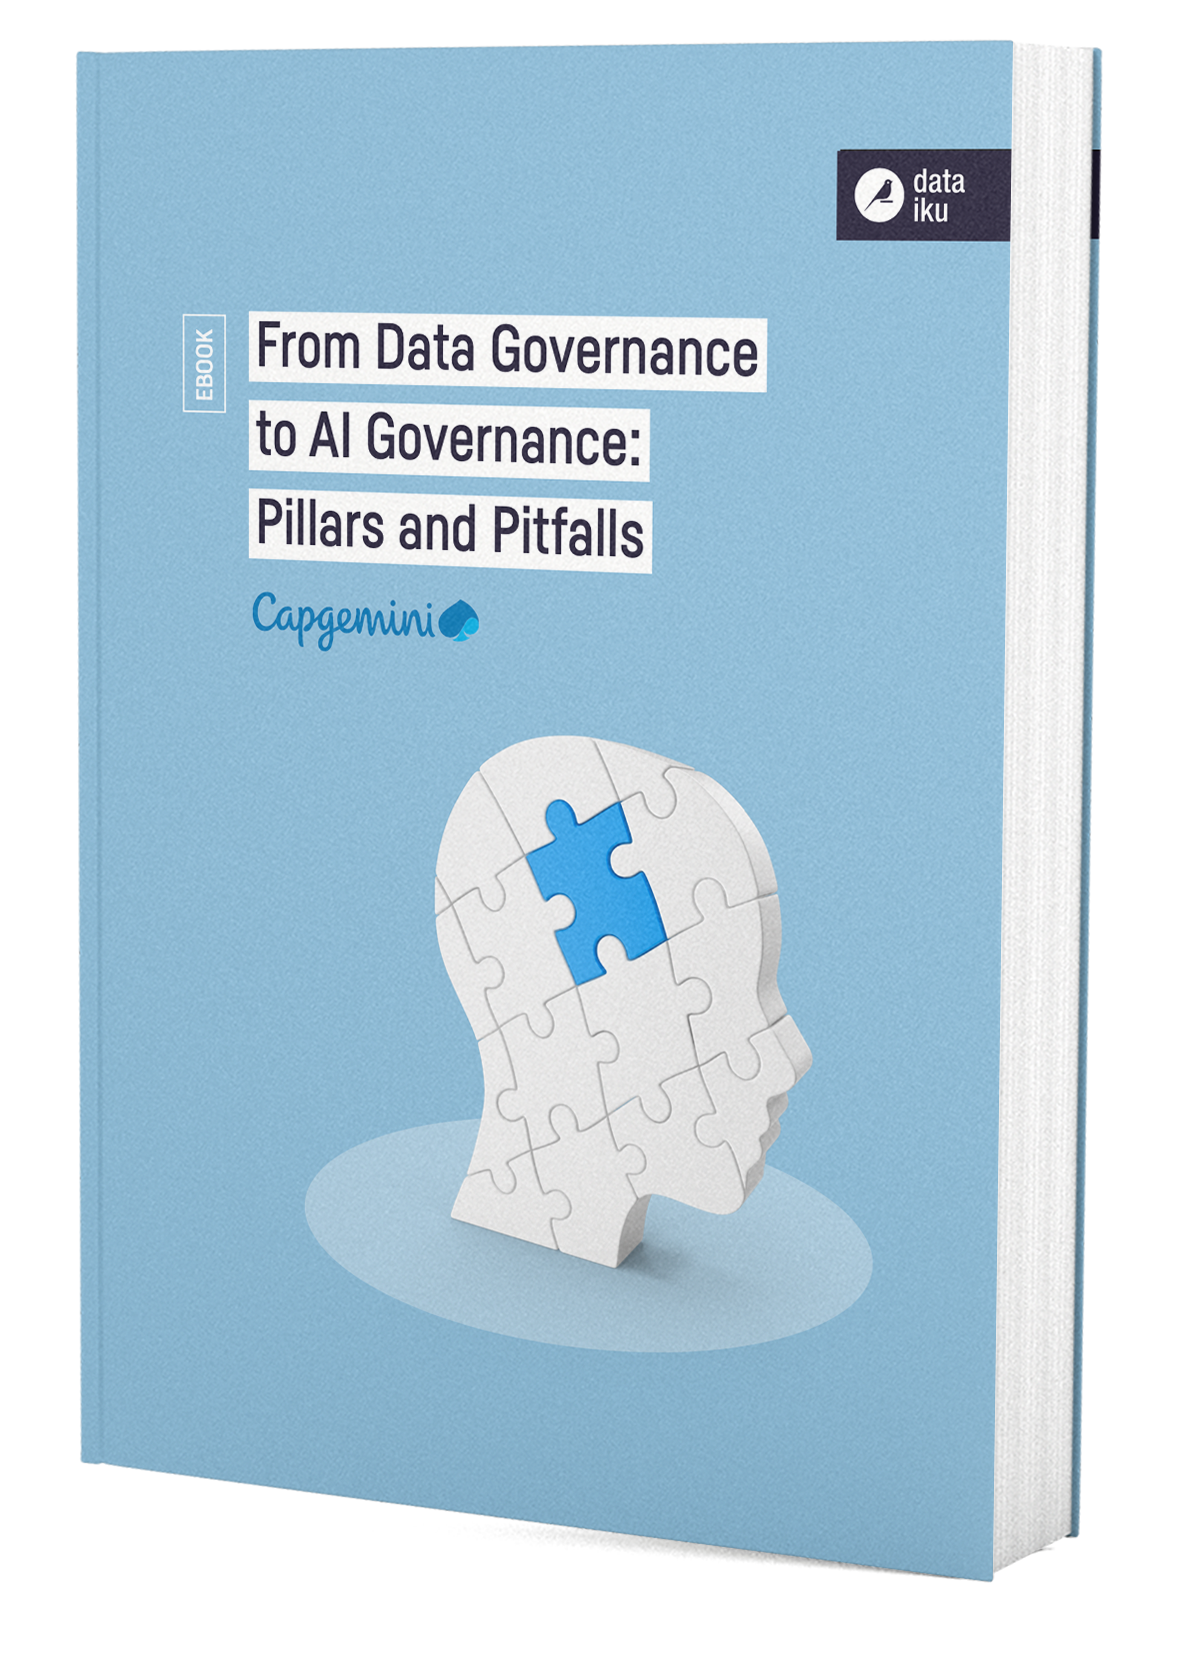 from data governance to AI governance 3D book cover